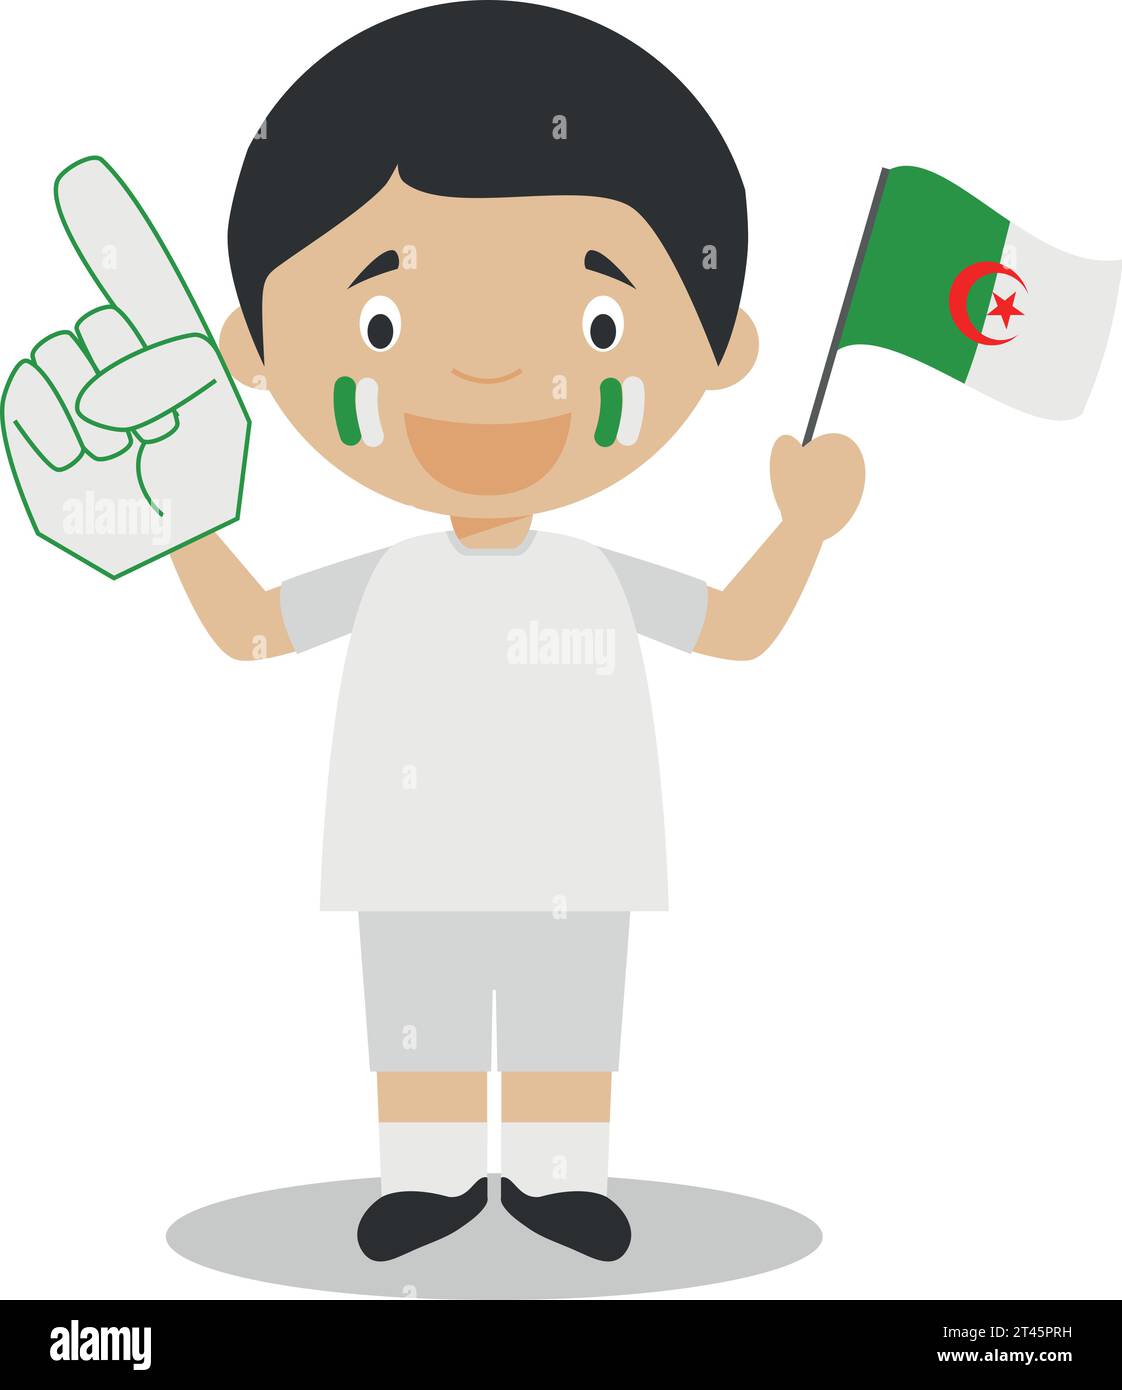 National sport team fan from Algeria with flag and glove Vector Illustration Stock Vector